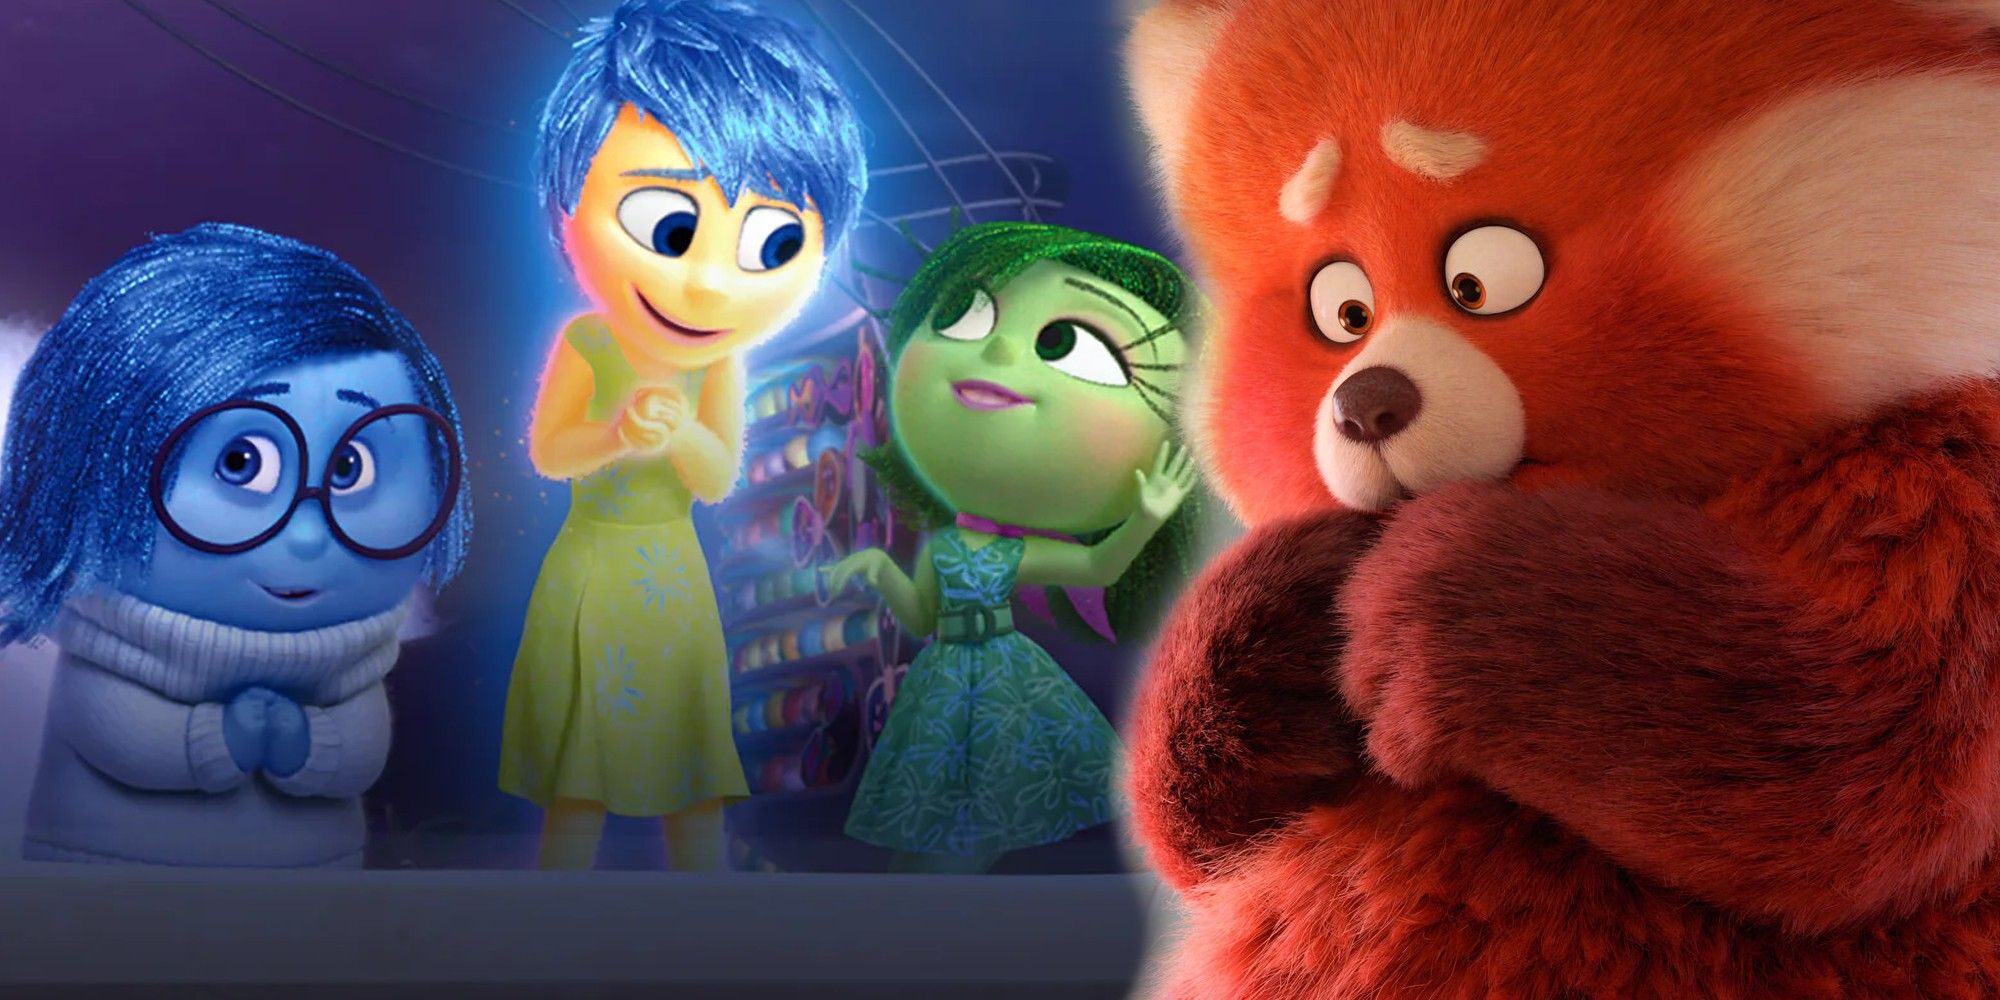 Composite image of characters from Inside Out and Turning Red